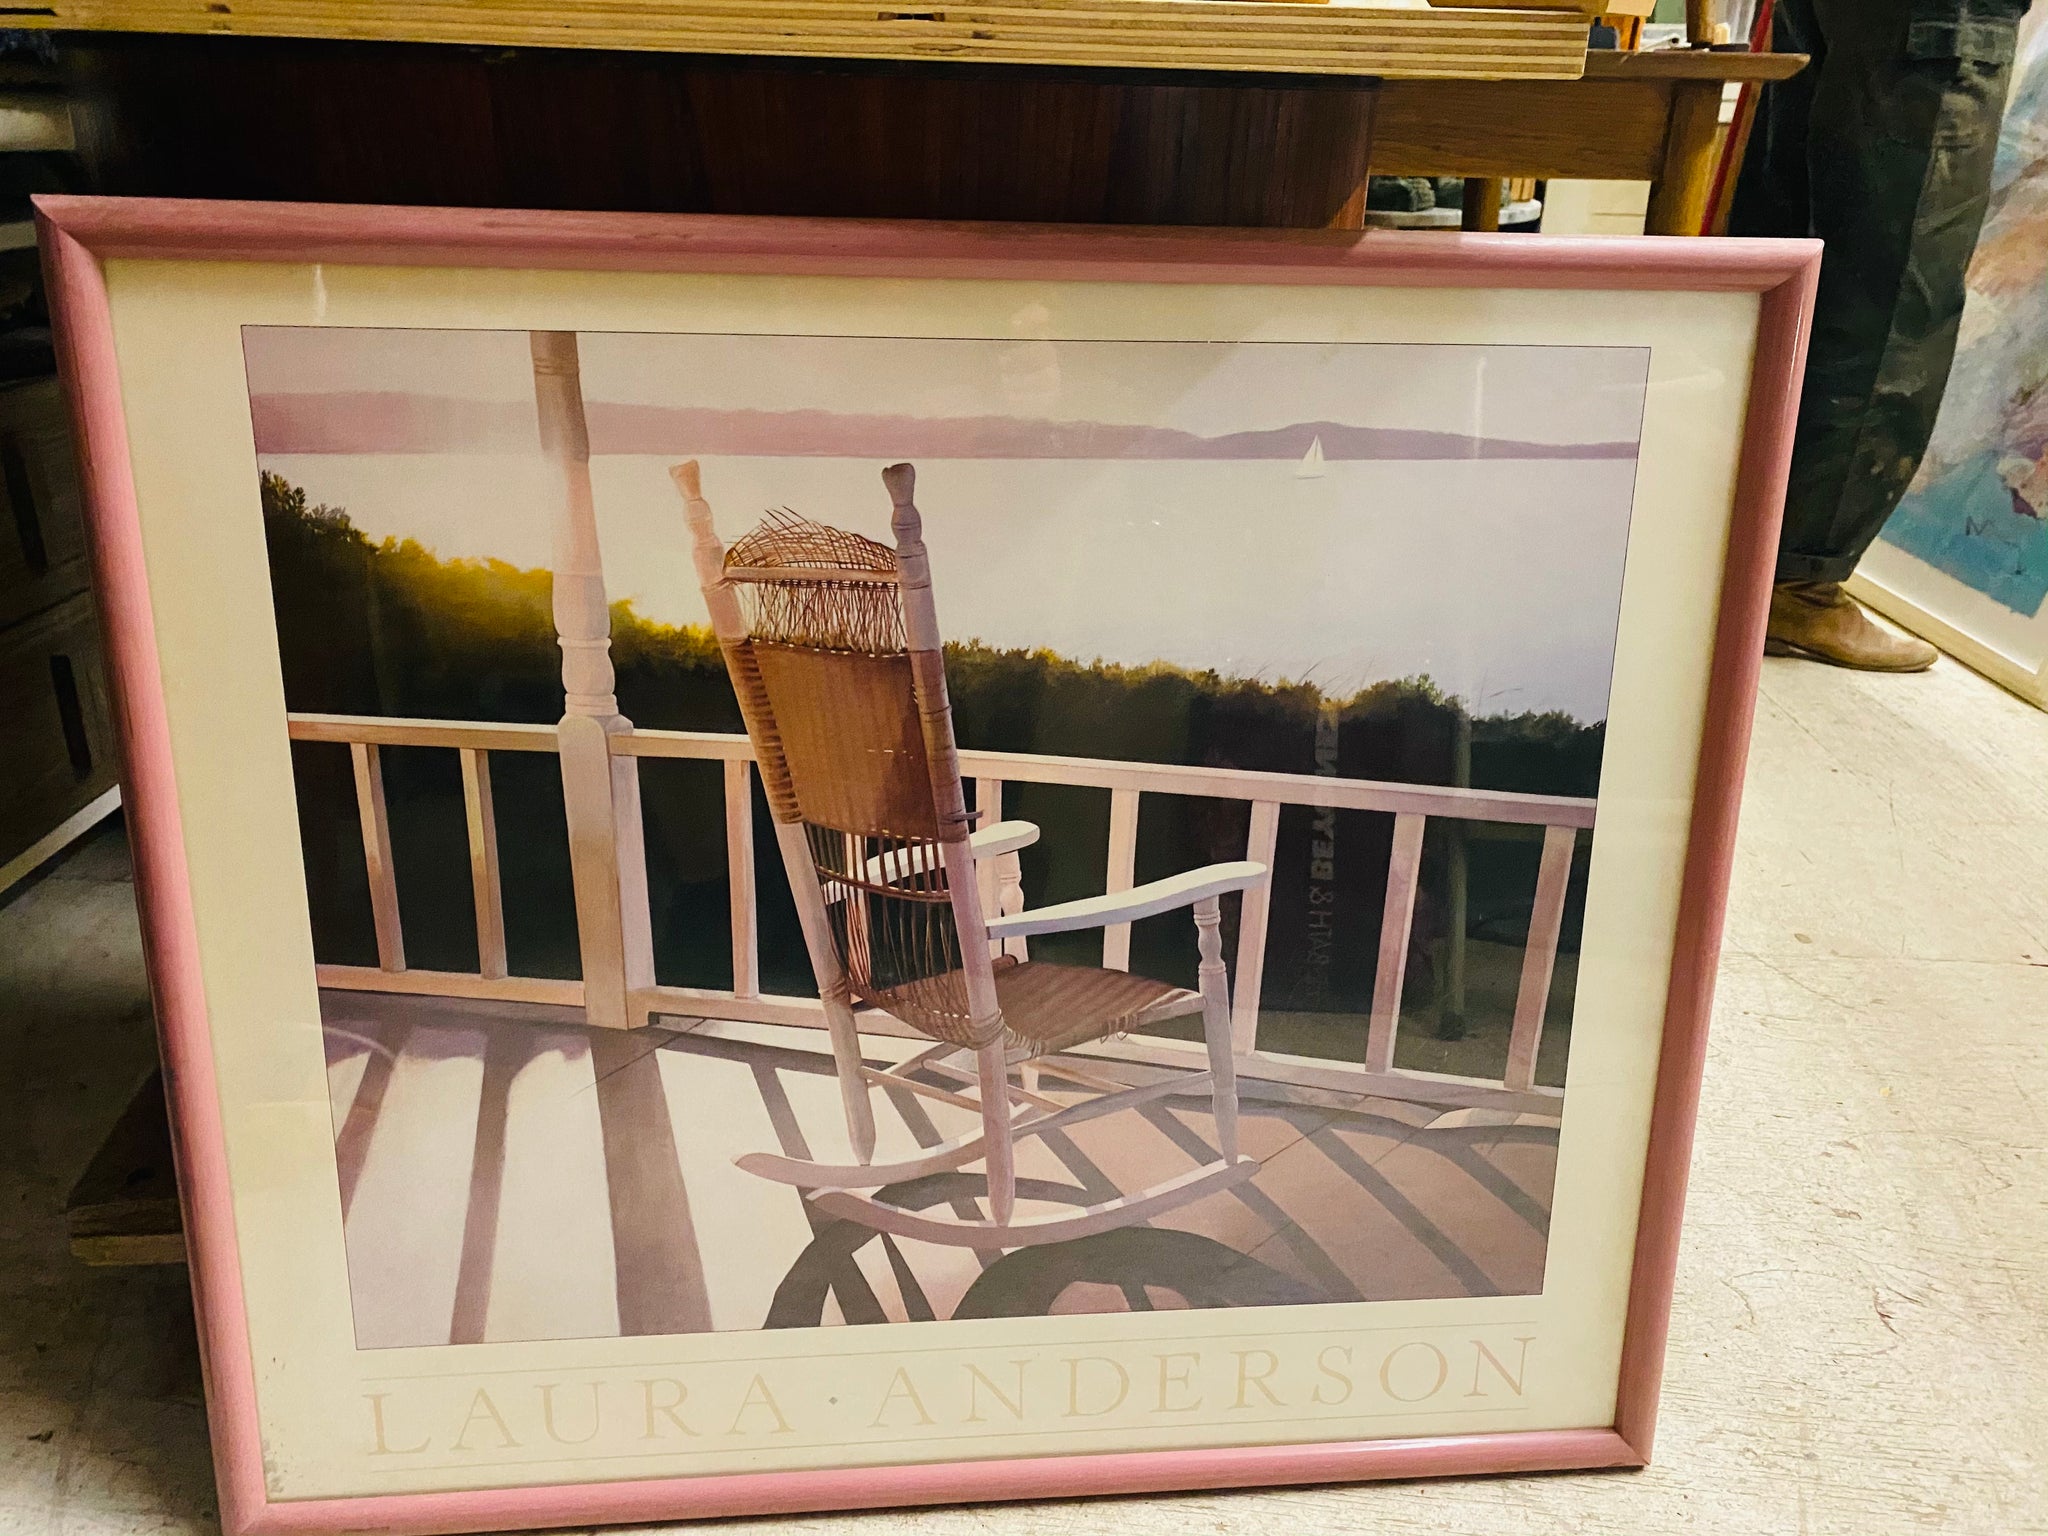 Laura Anderson Pink Lacquer Framed Rocking Chair Photography  Print